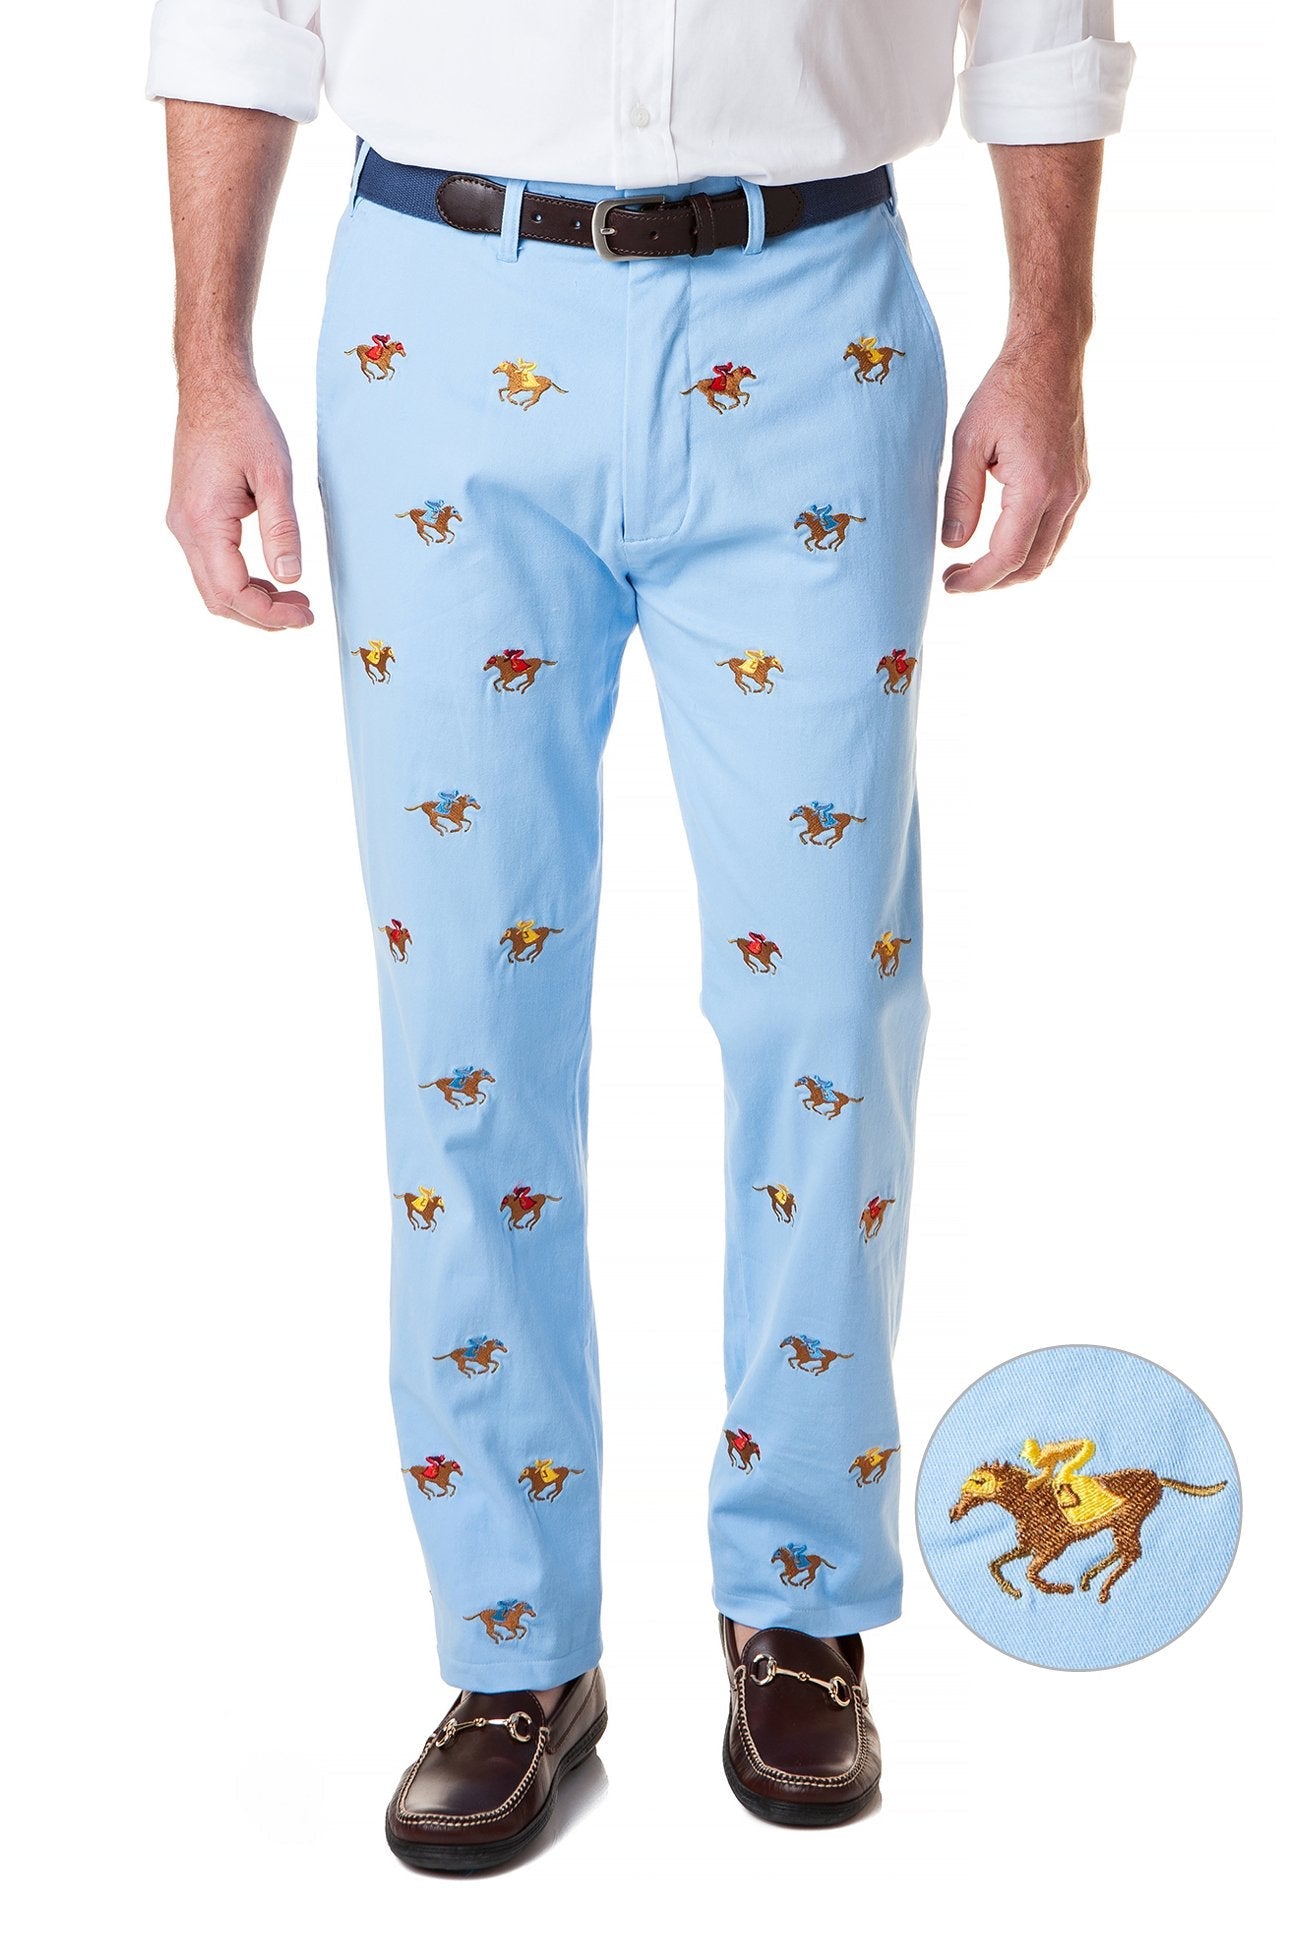 http://www.castawayclothing.com/cdn/shop/products/harbor-pant-stretch-twill-liberty-with-racing-horses-castaway-clothing-mens-embroidered-pants-13705160589399.jpg?v=1647528021